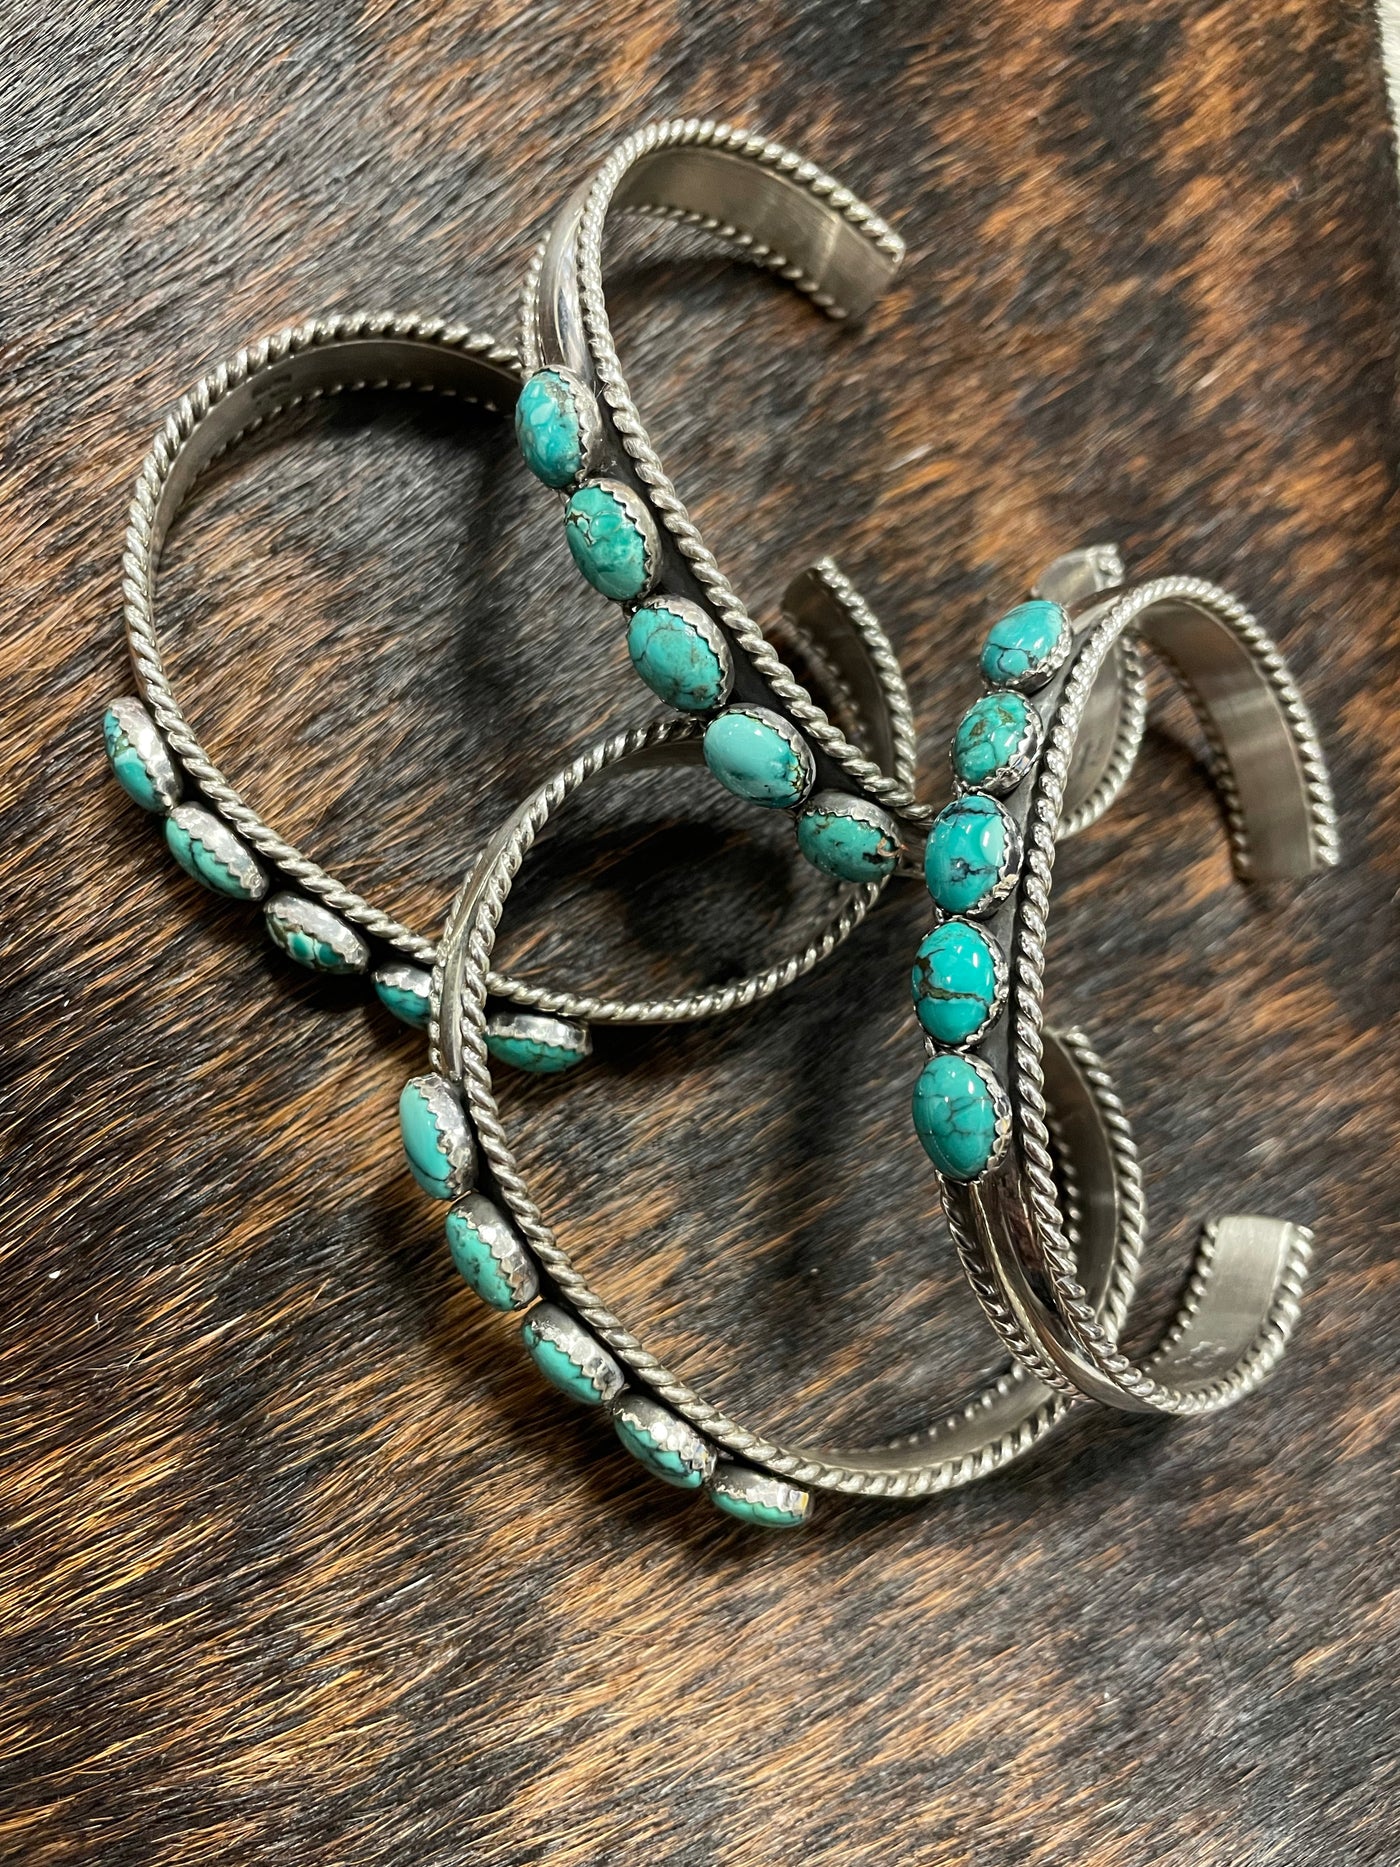 The Karla Turquoise Cuff